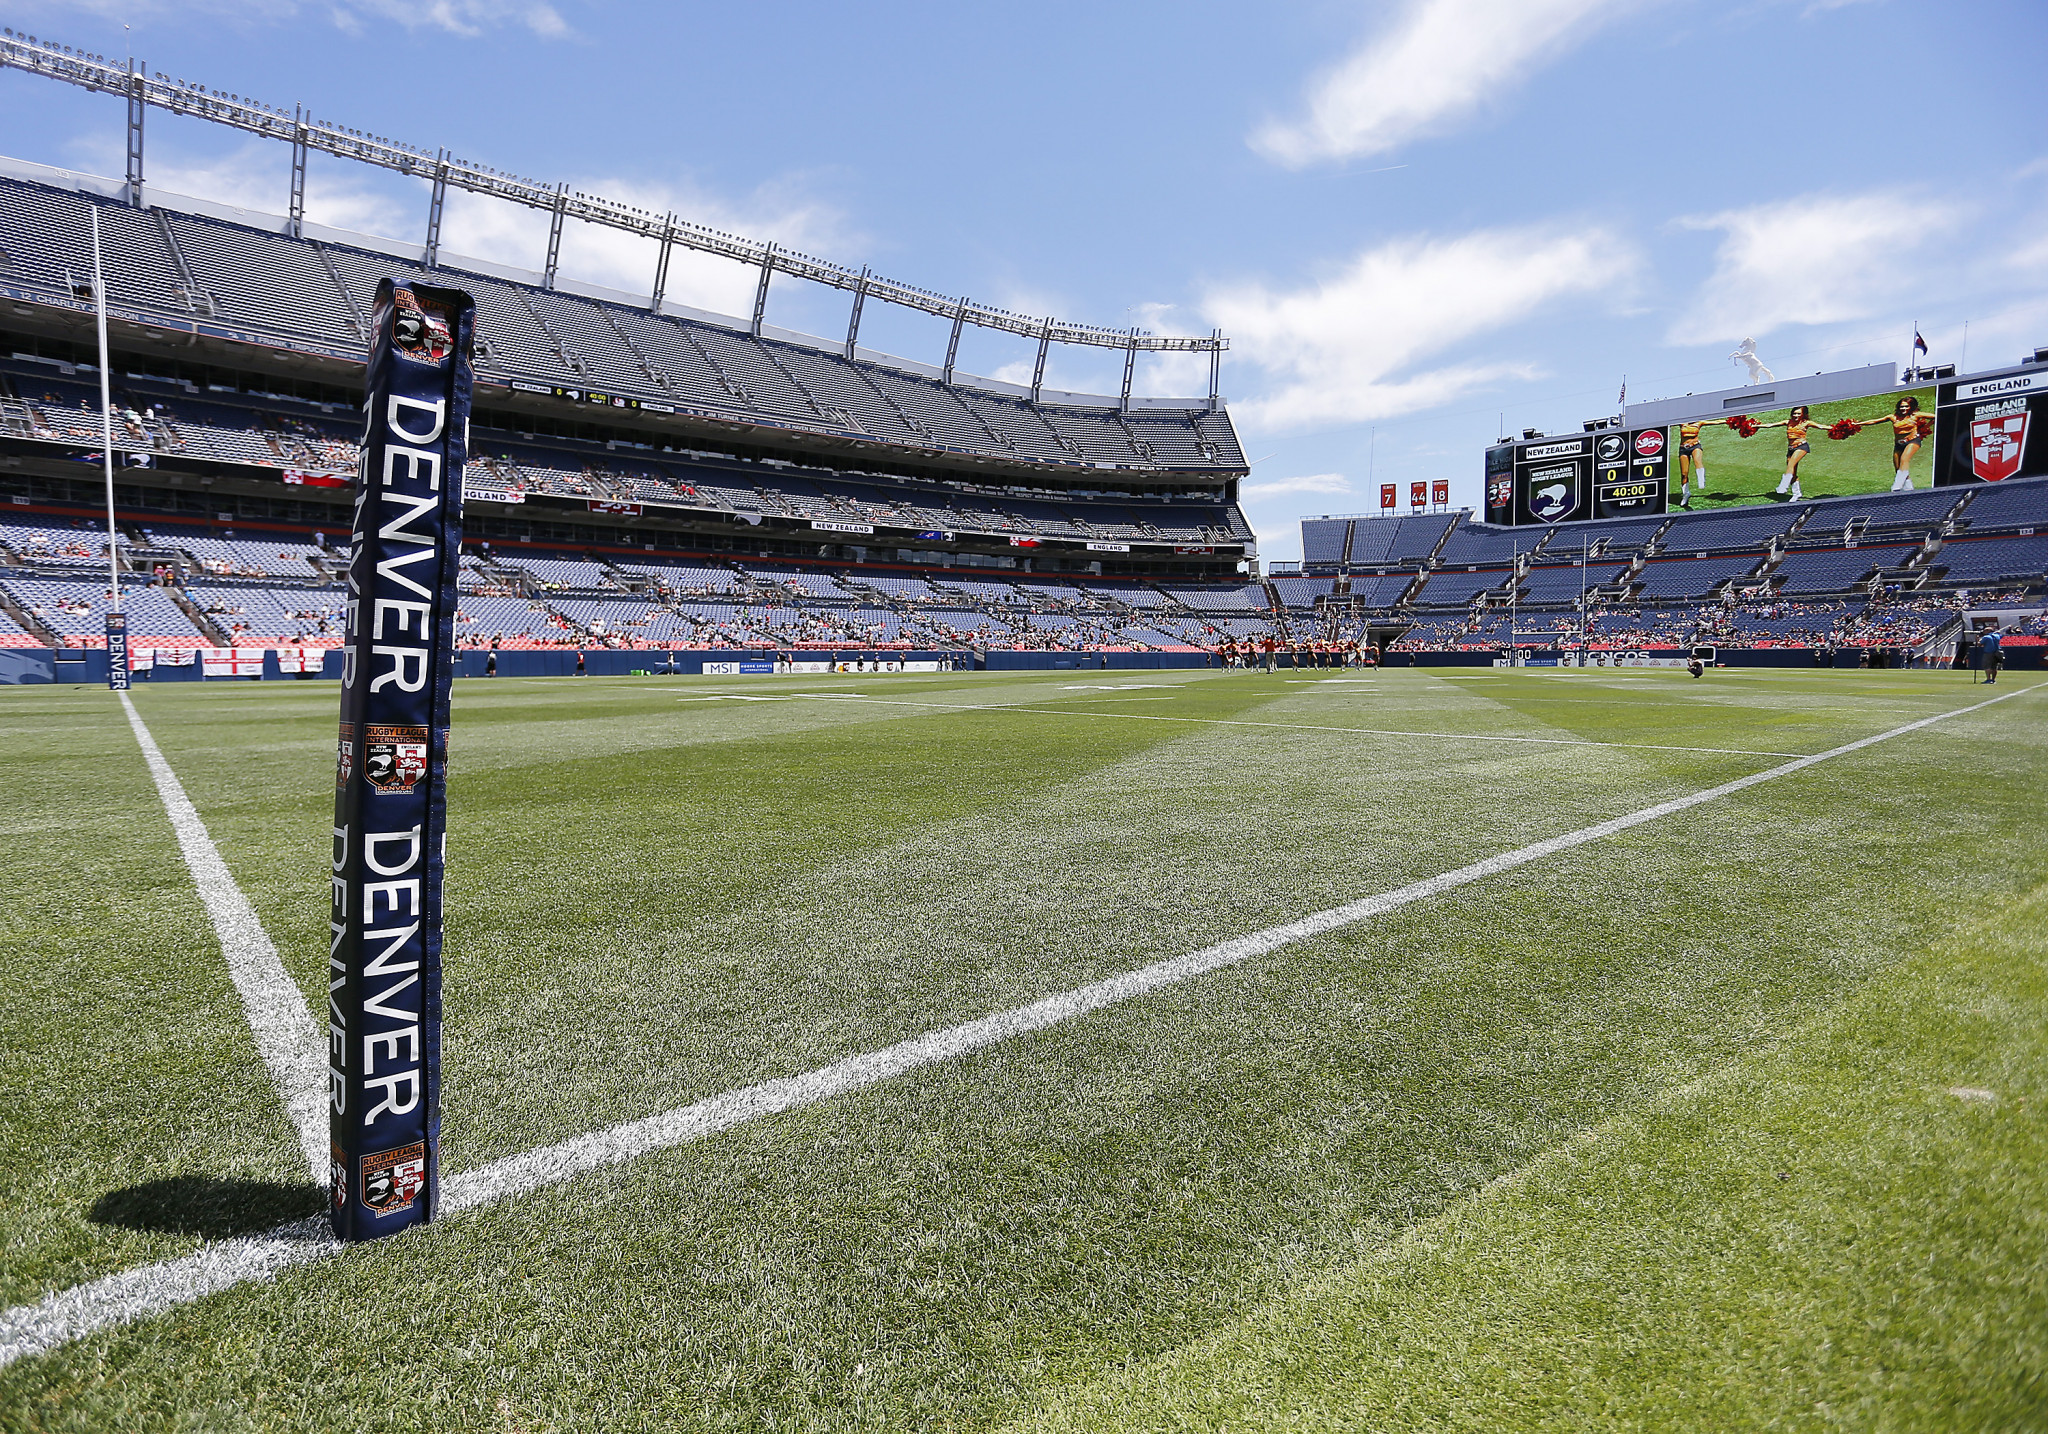 World Rugby chief executive Alan Gilpin visited the Empower Field in Denver, one of the proposed venues for the 2031 and 2033 Rugby World Cups ©Getty Images